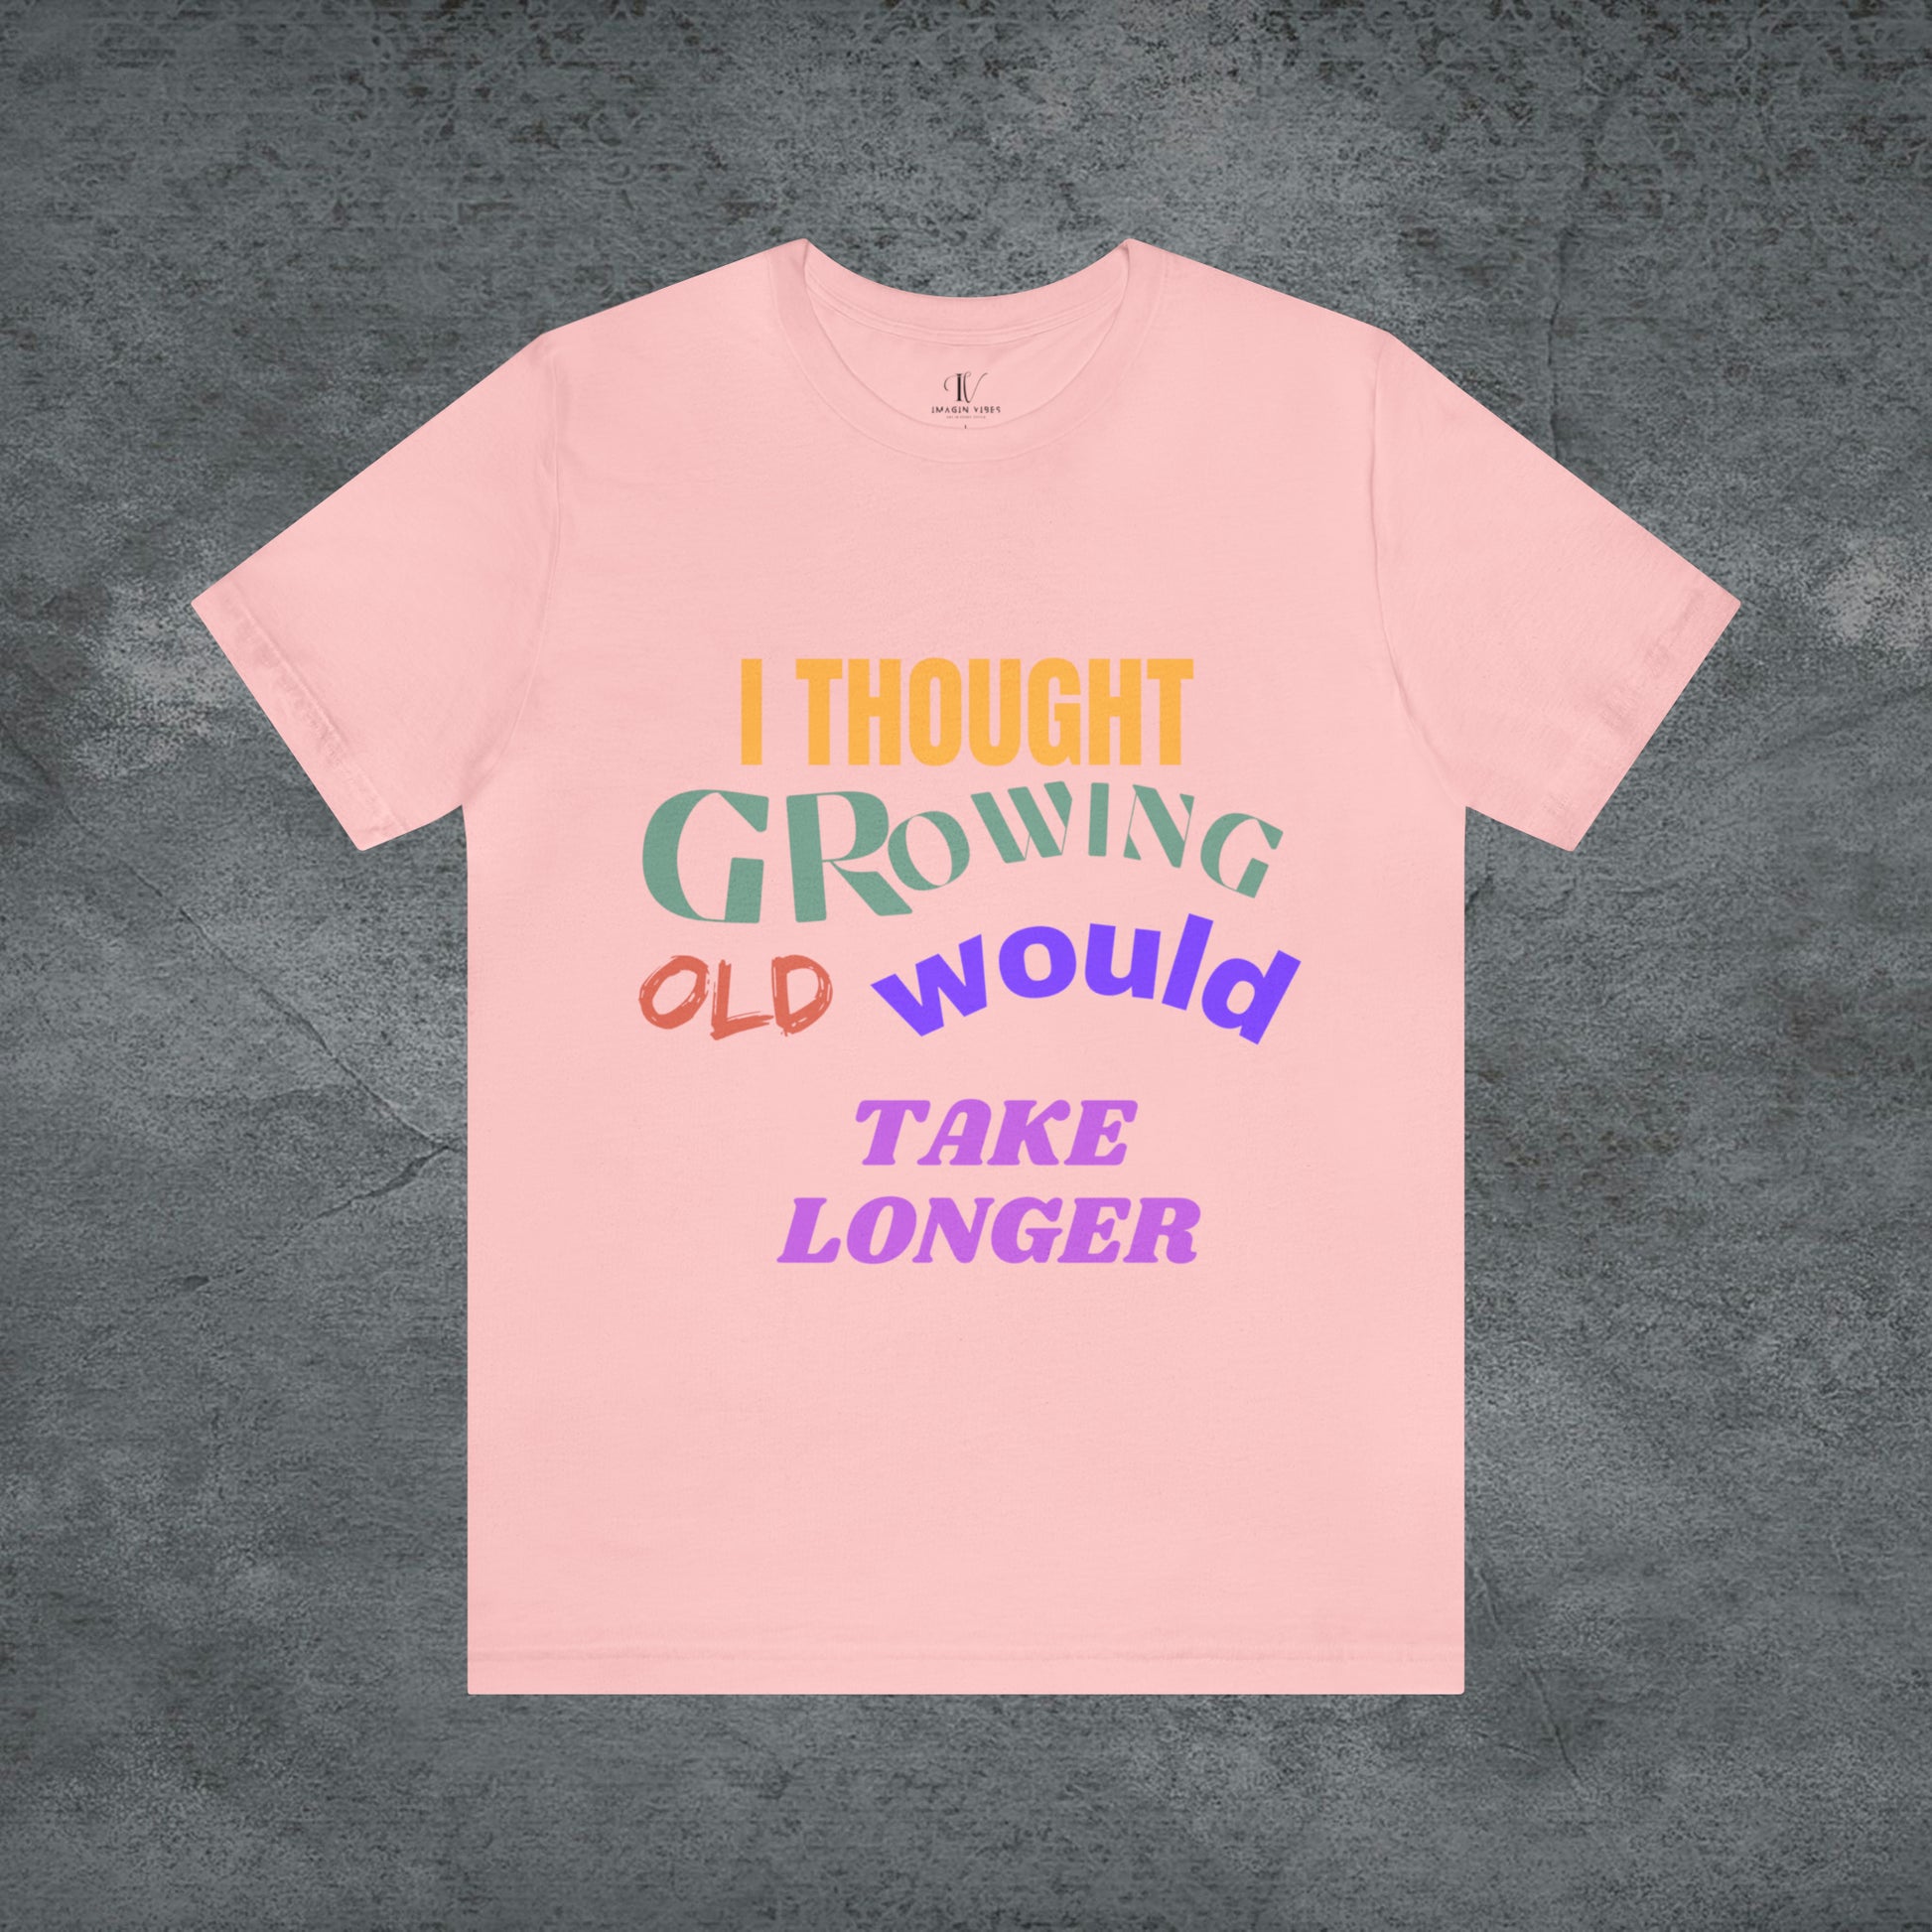 I Thought Growing Old Would Take Longer T-Shirt - Getting Older T-Shirt - Funny Adulting Tee - Old Age T-Shirt - Old Person T-Shirt T-Shirt Pink S 